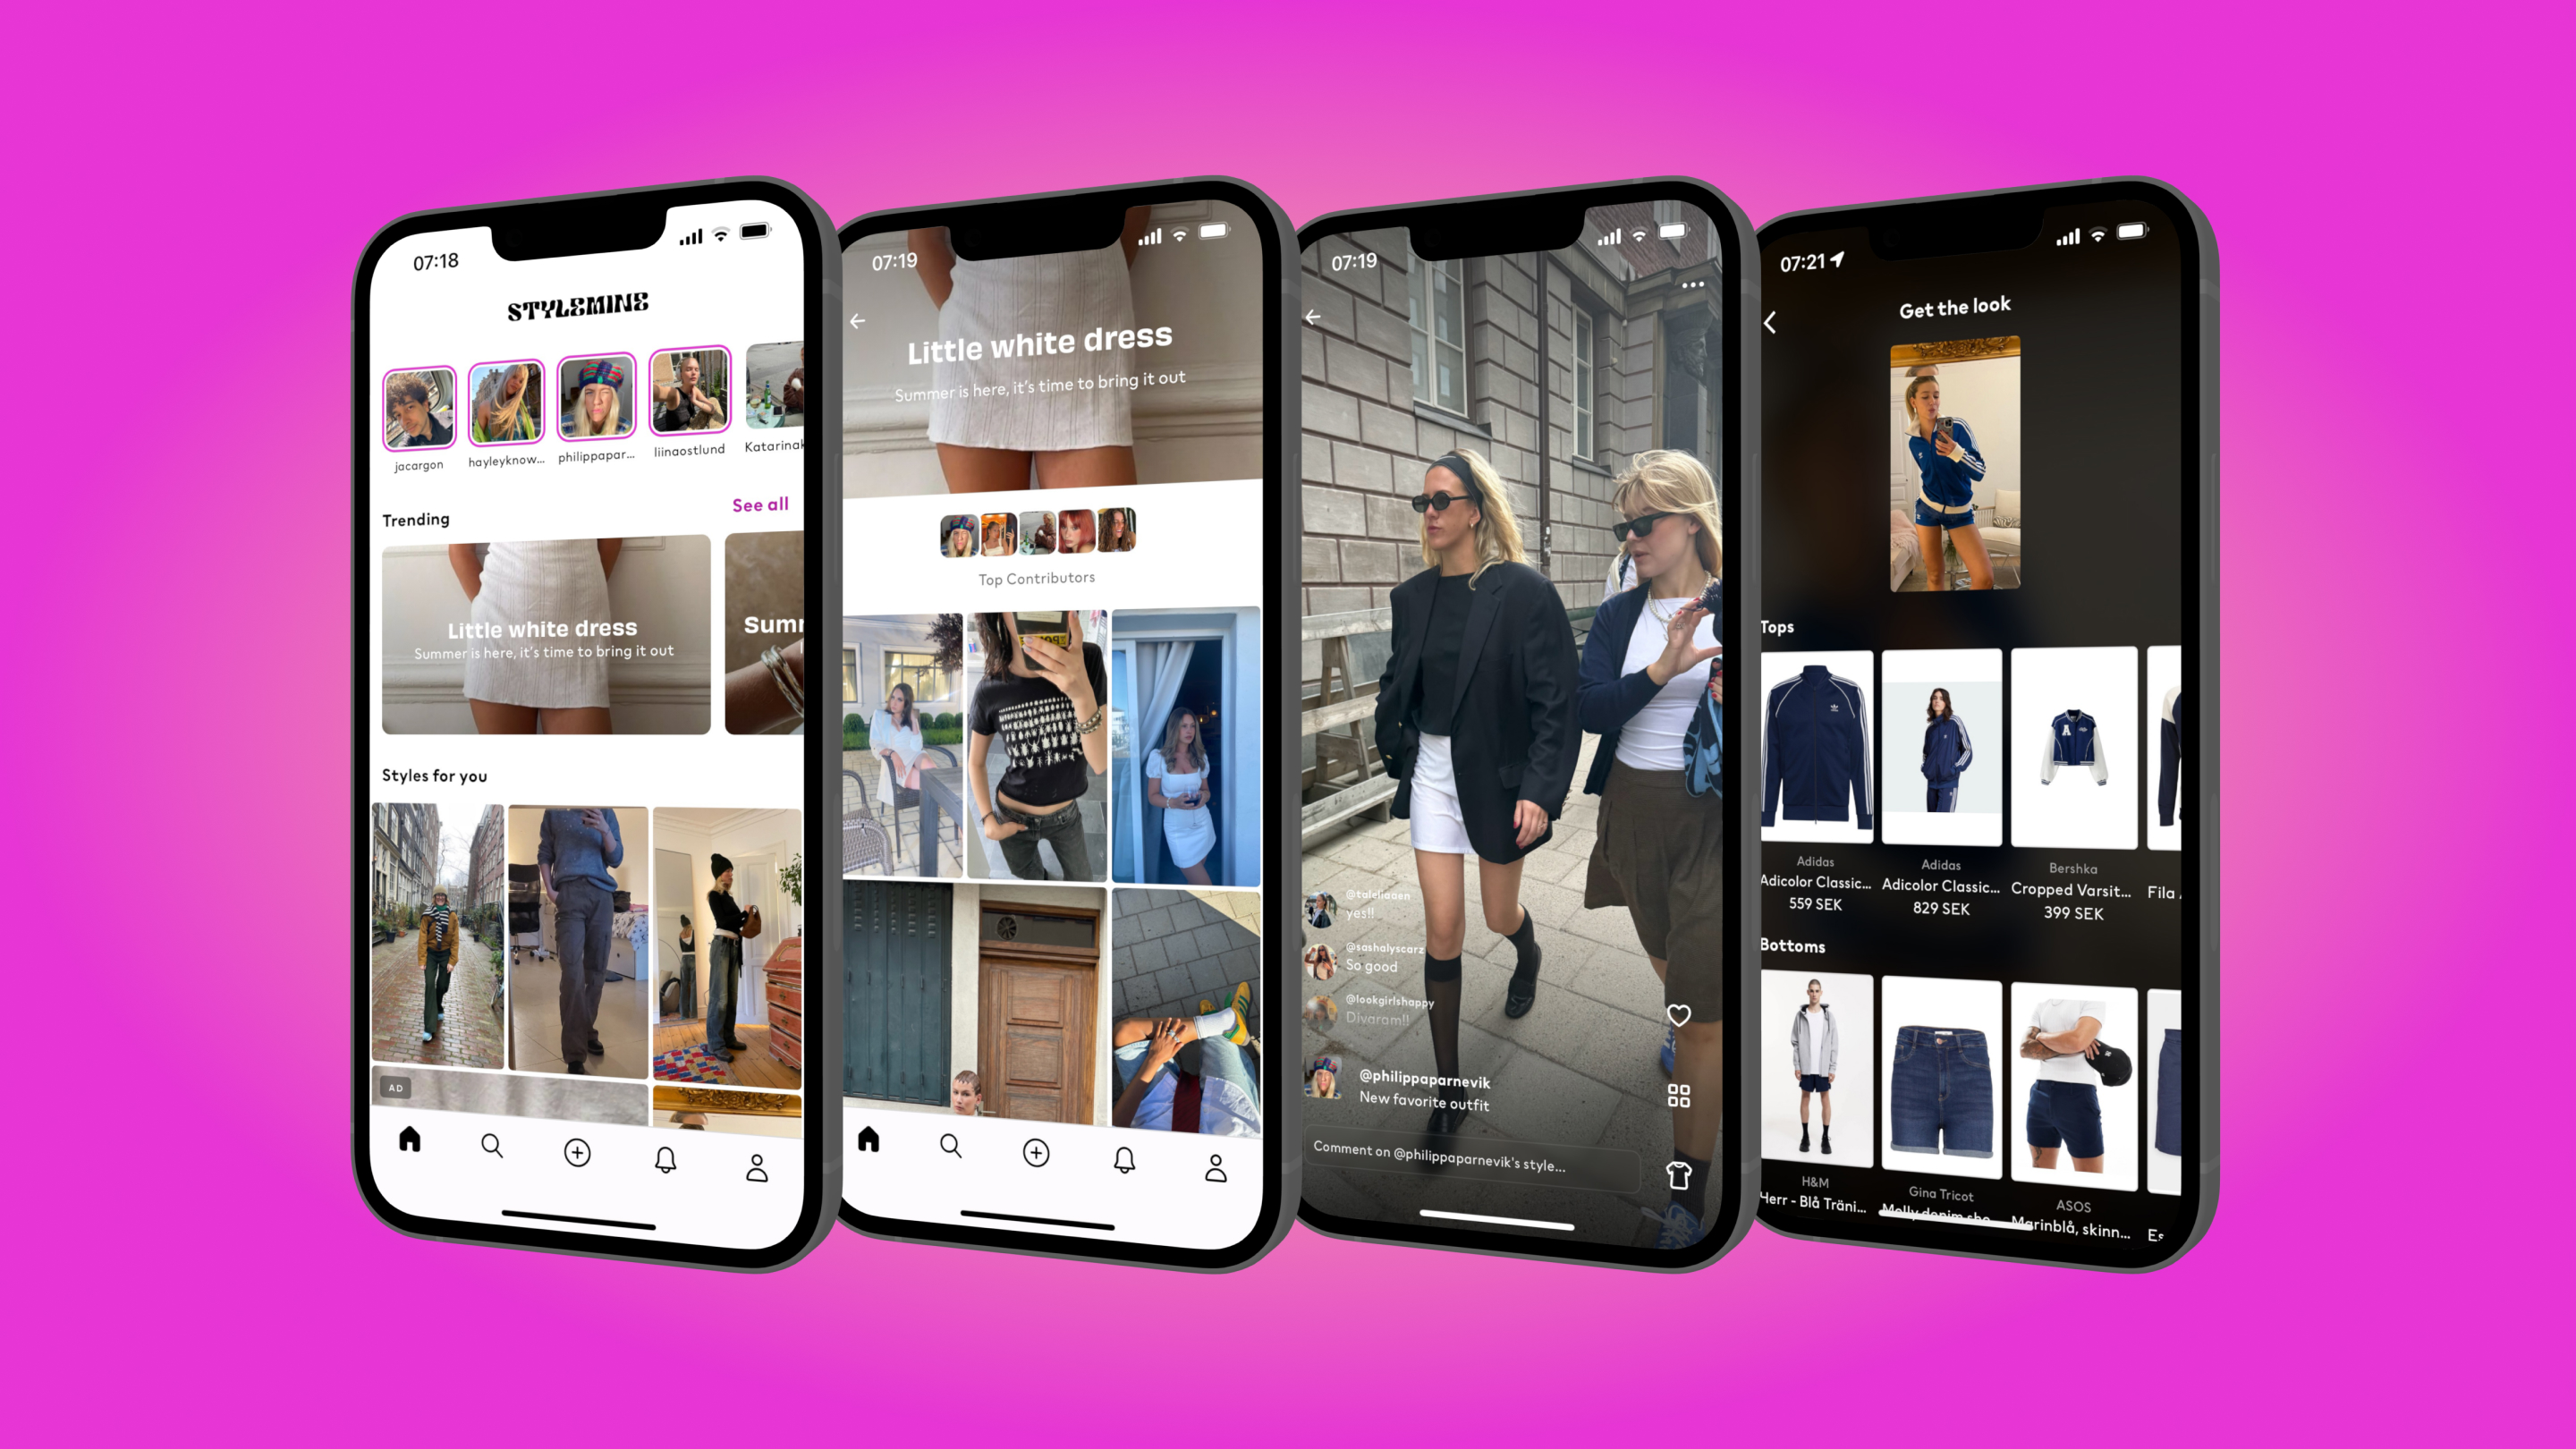 Stylemine is the social media app just for fashion